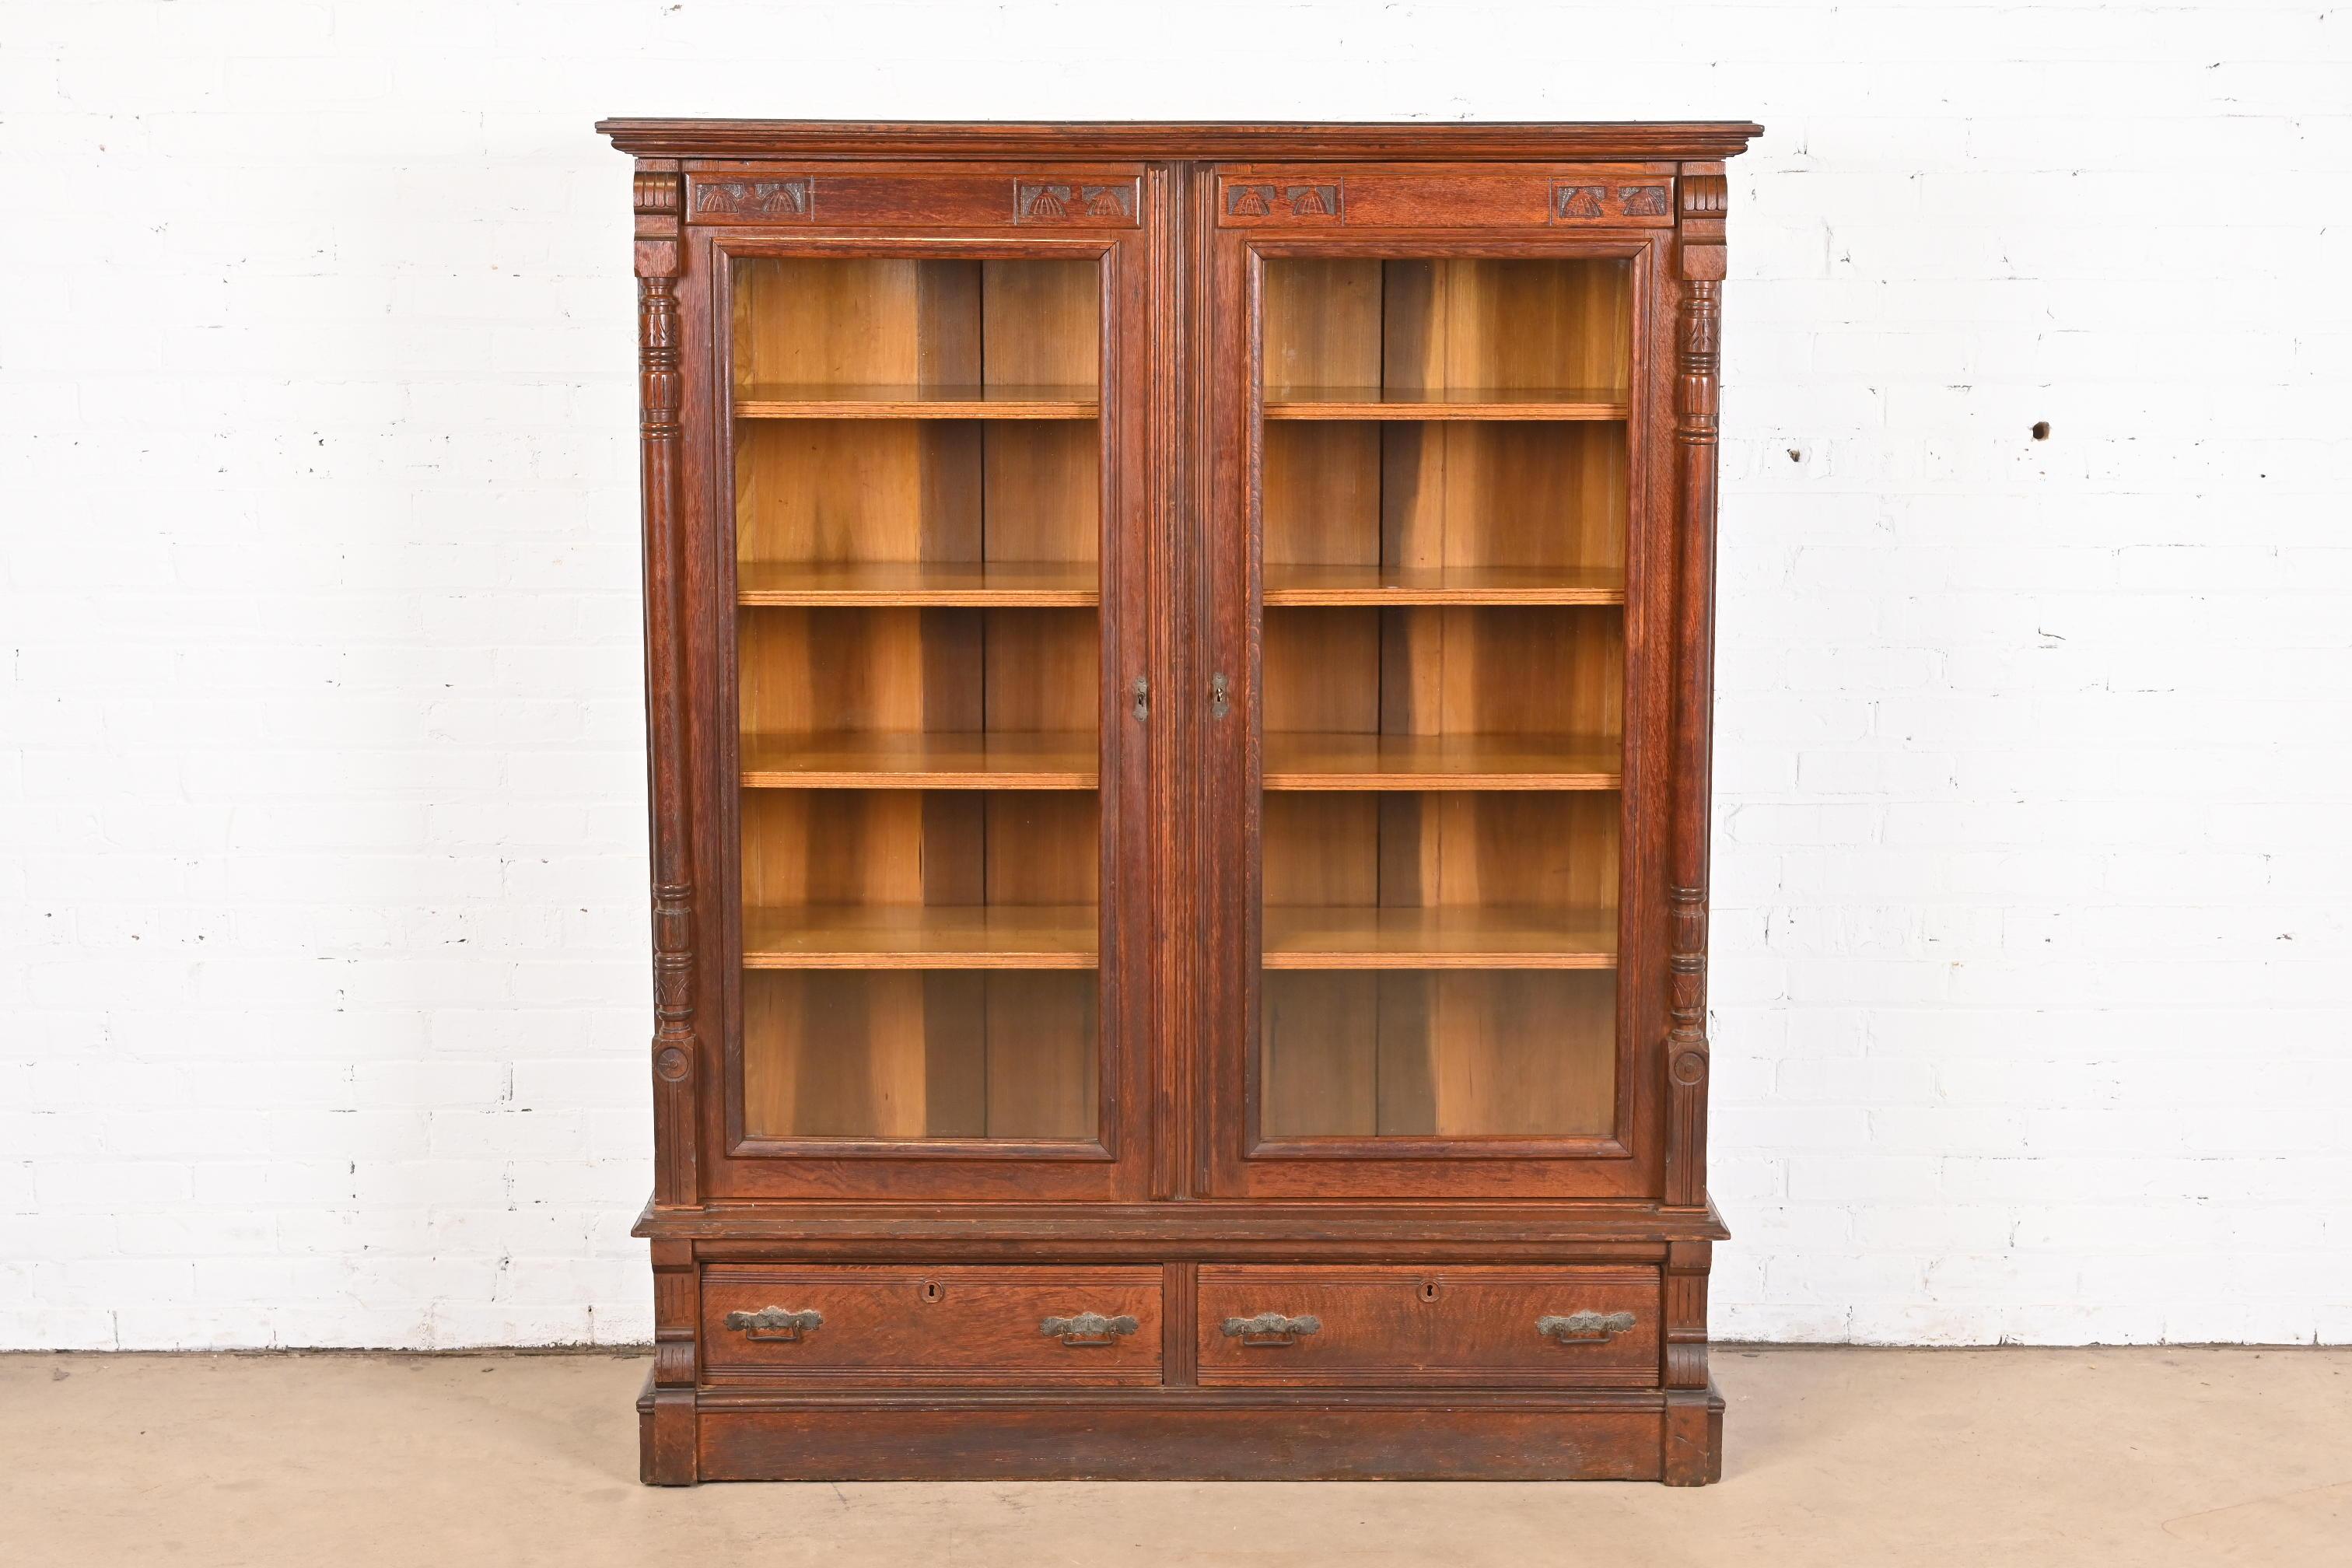 An outstanding antique Eastlake Victorian bookcase cabinet

In the manner of Herter Brothers

USA, Circa 1880s

Carved solid quarter sawn oak, with glass front doors and brass hardware.

Measures: 53.25